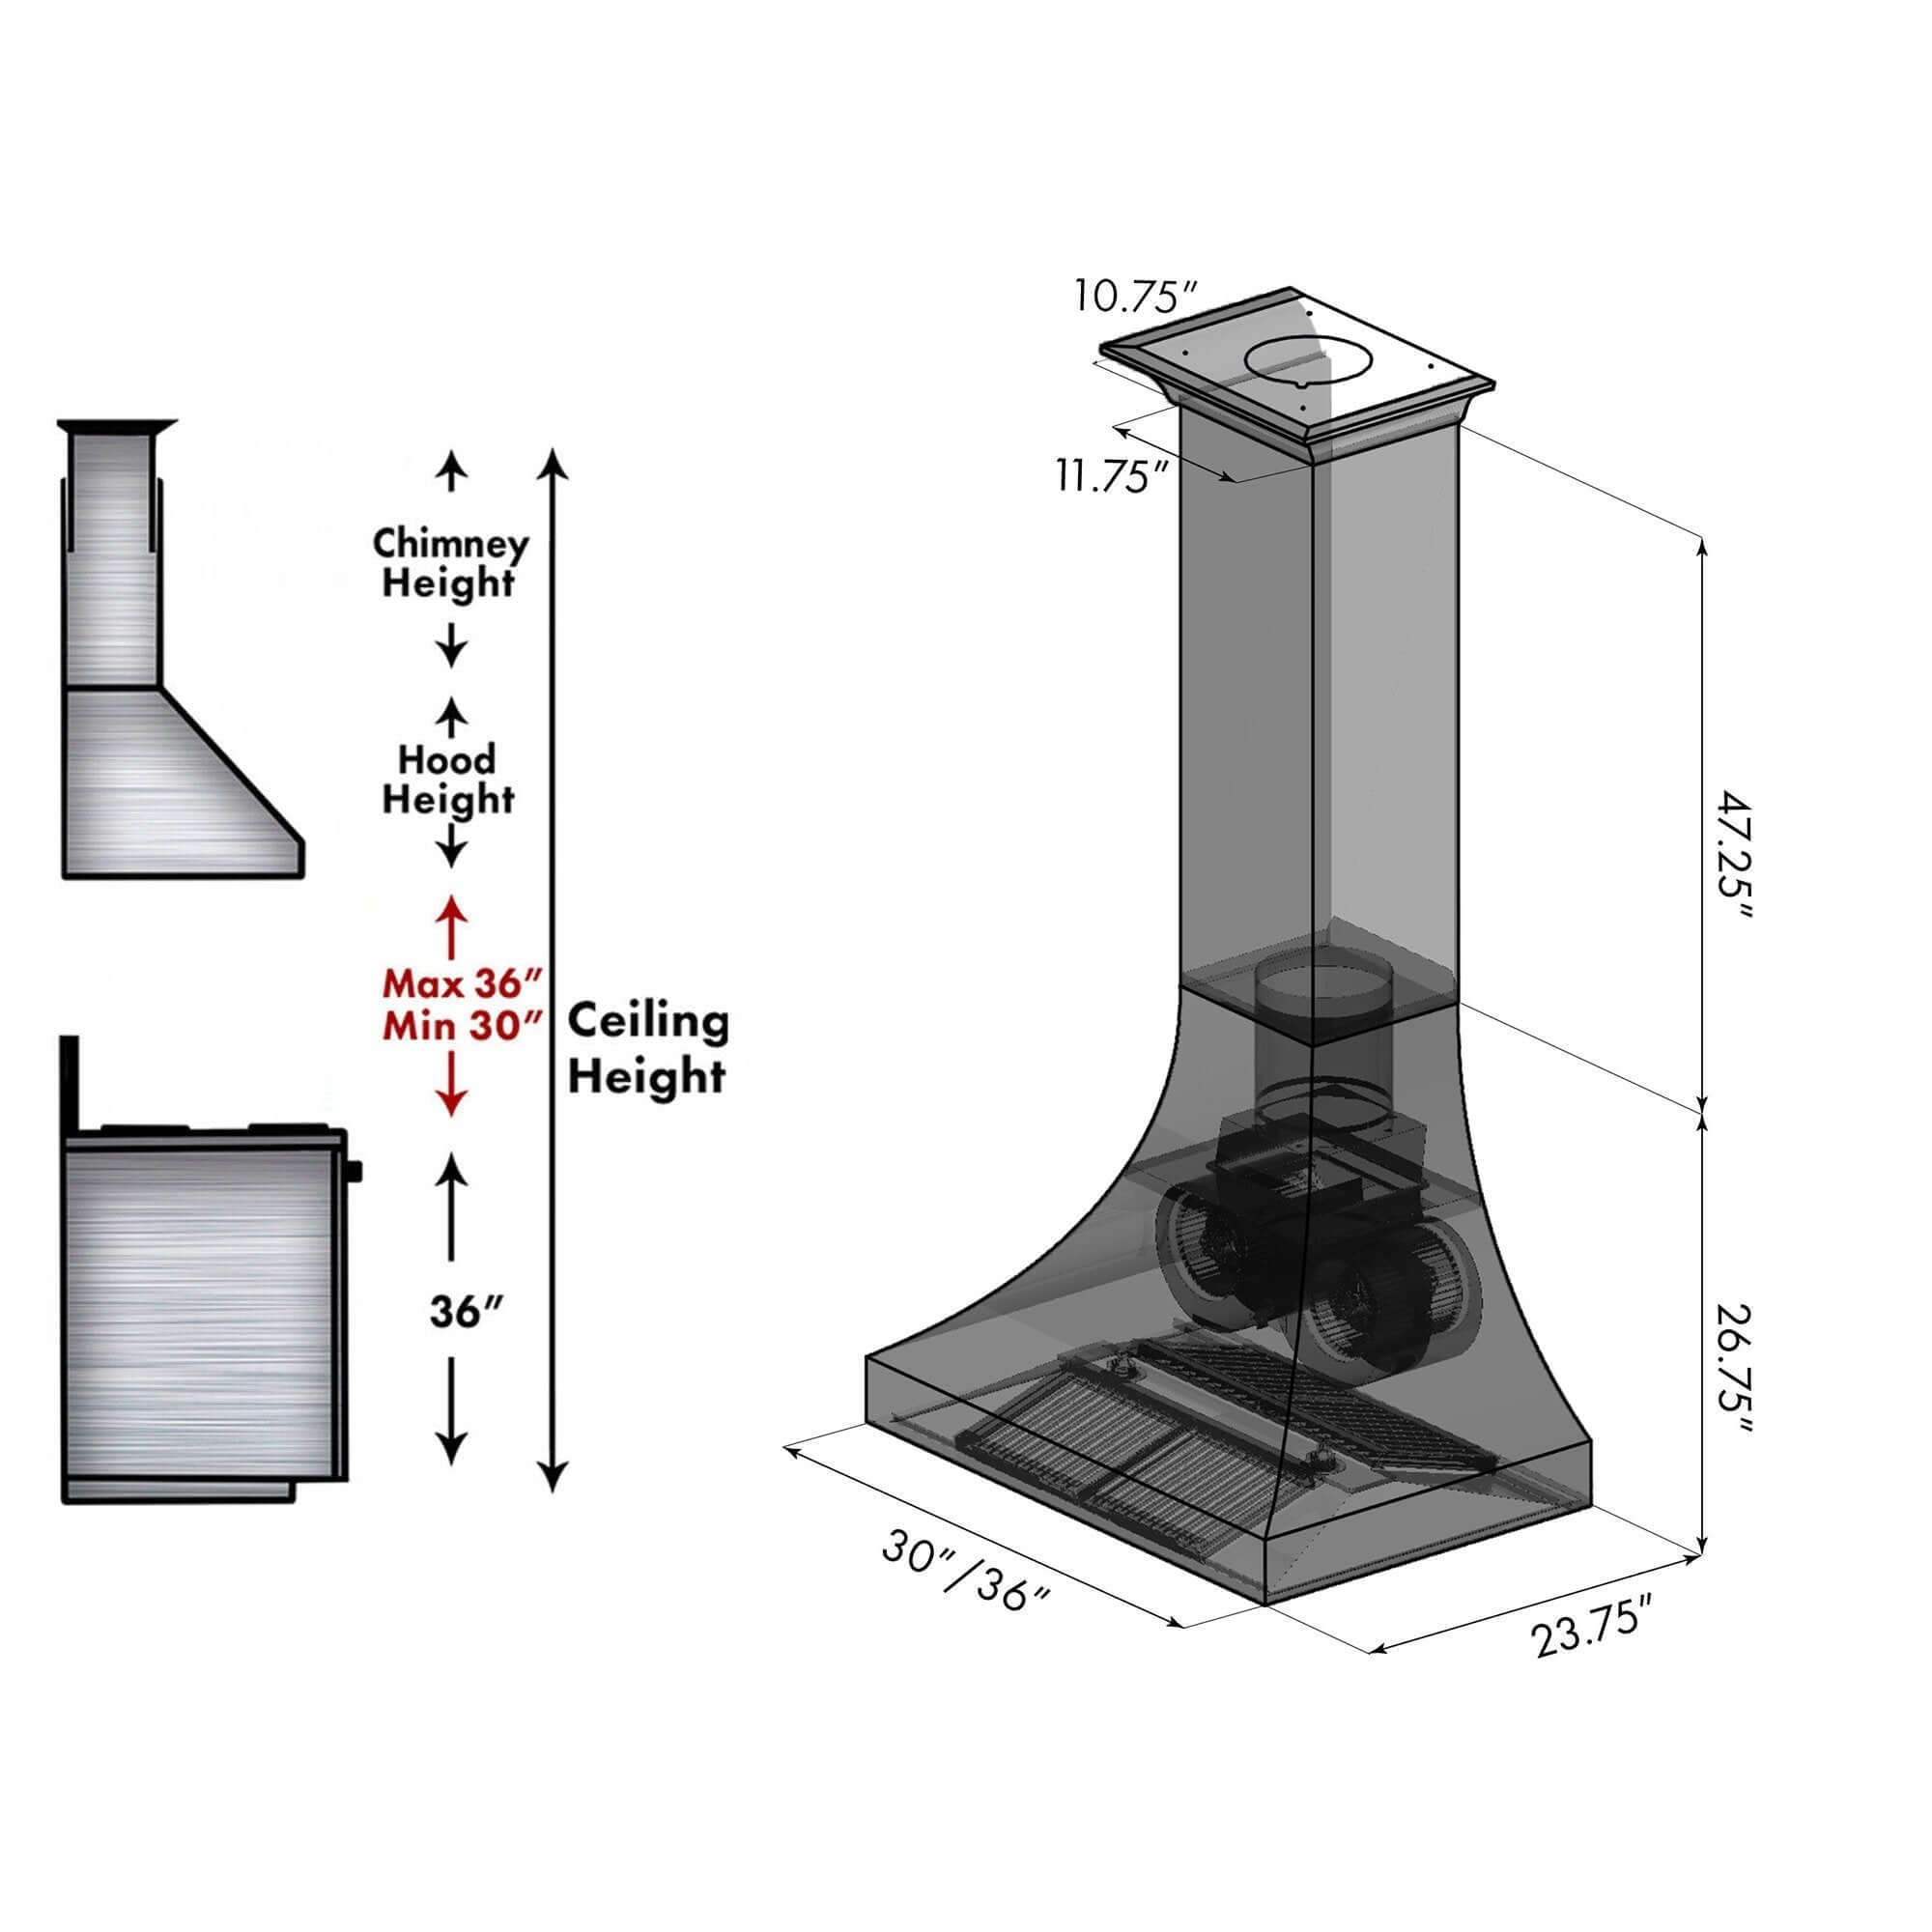 ZLINE Designer Series DuraSnow® Stainless Steel Wall Range Hood (8632S) chimney height guide and dimensional measurements for 30" and 36" sizes.